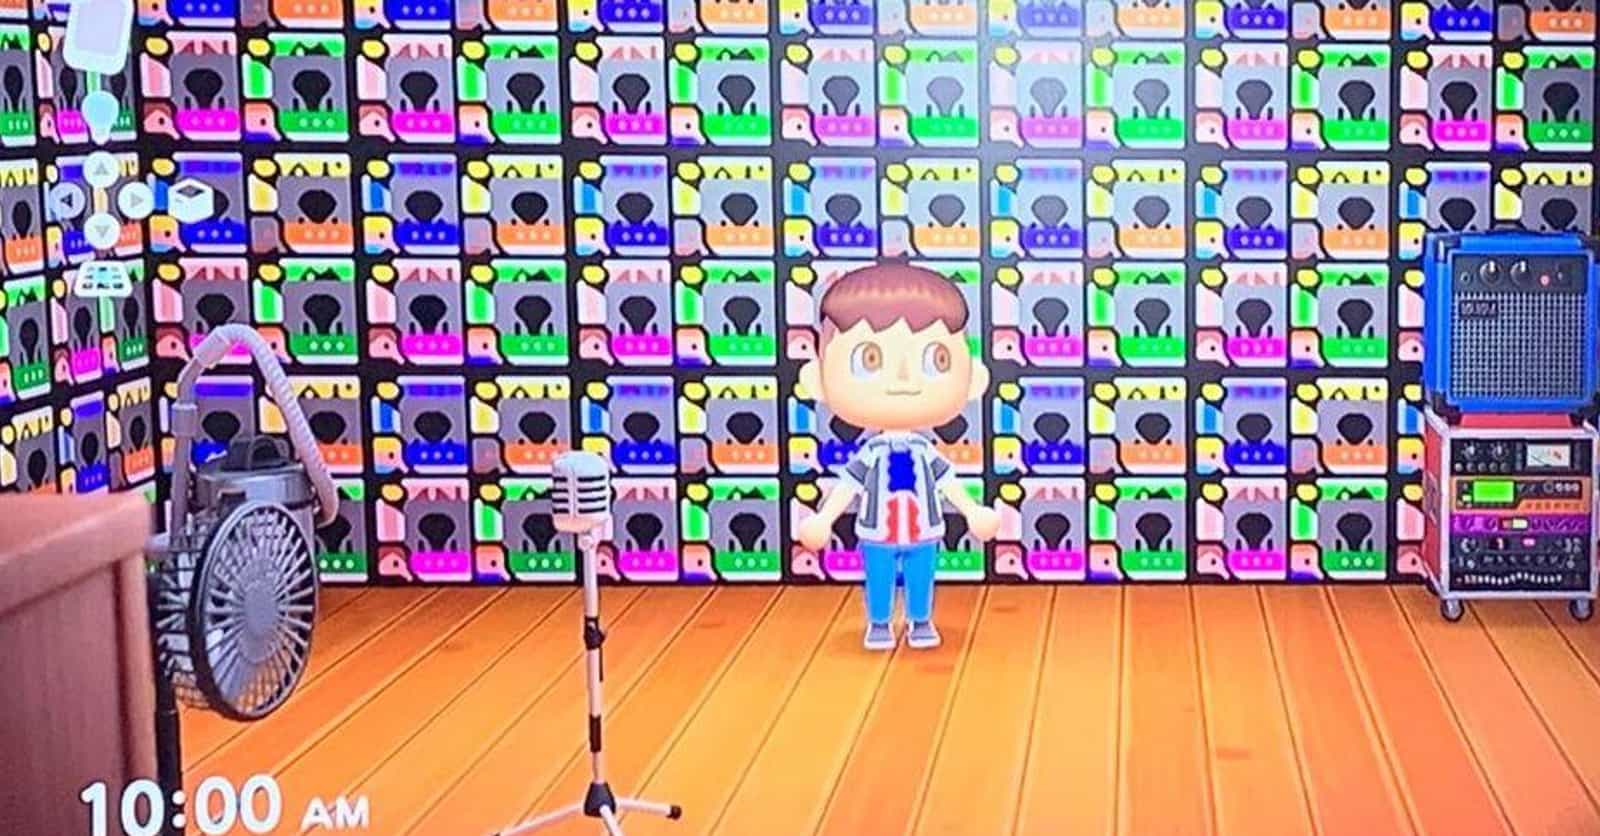 20 Custom Wallpaper Designs To Scan And Use In 'Animal Crossing: New Horizons'